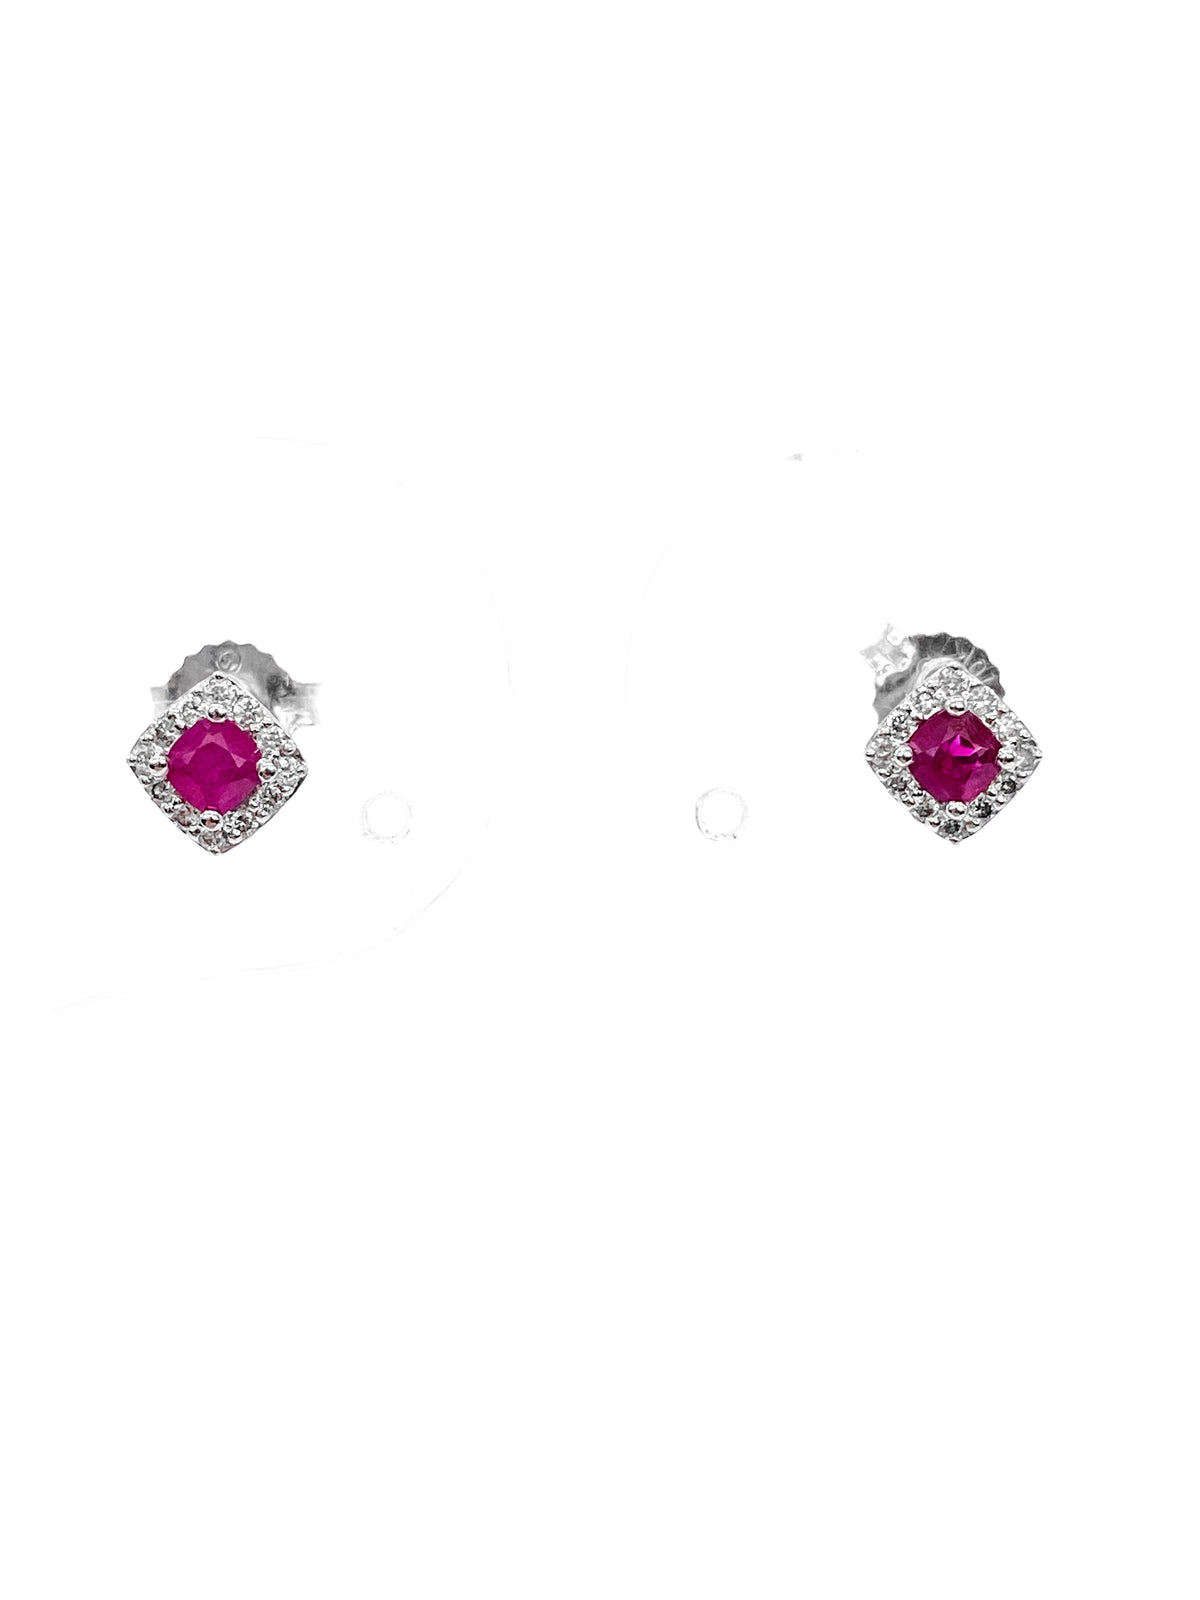 10K White Gold 0.40cttw Genuine Ruby and 0.12cttw Diamond Halo Stud Earrings